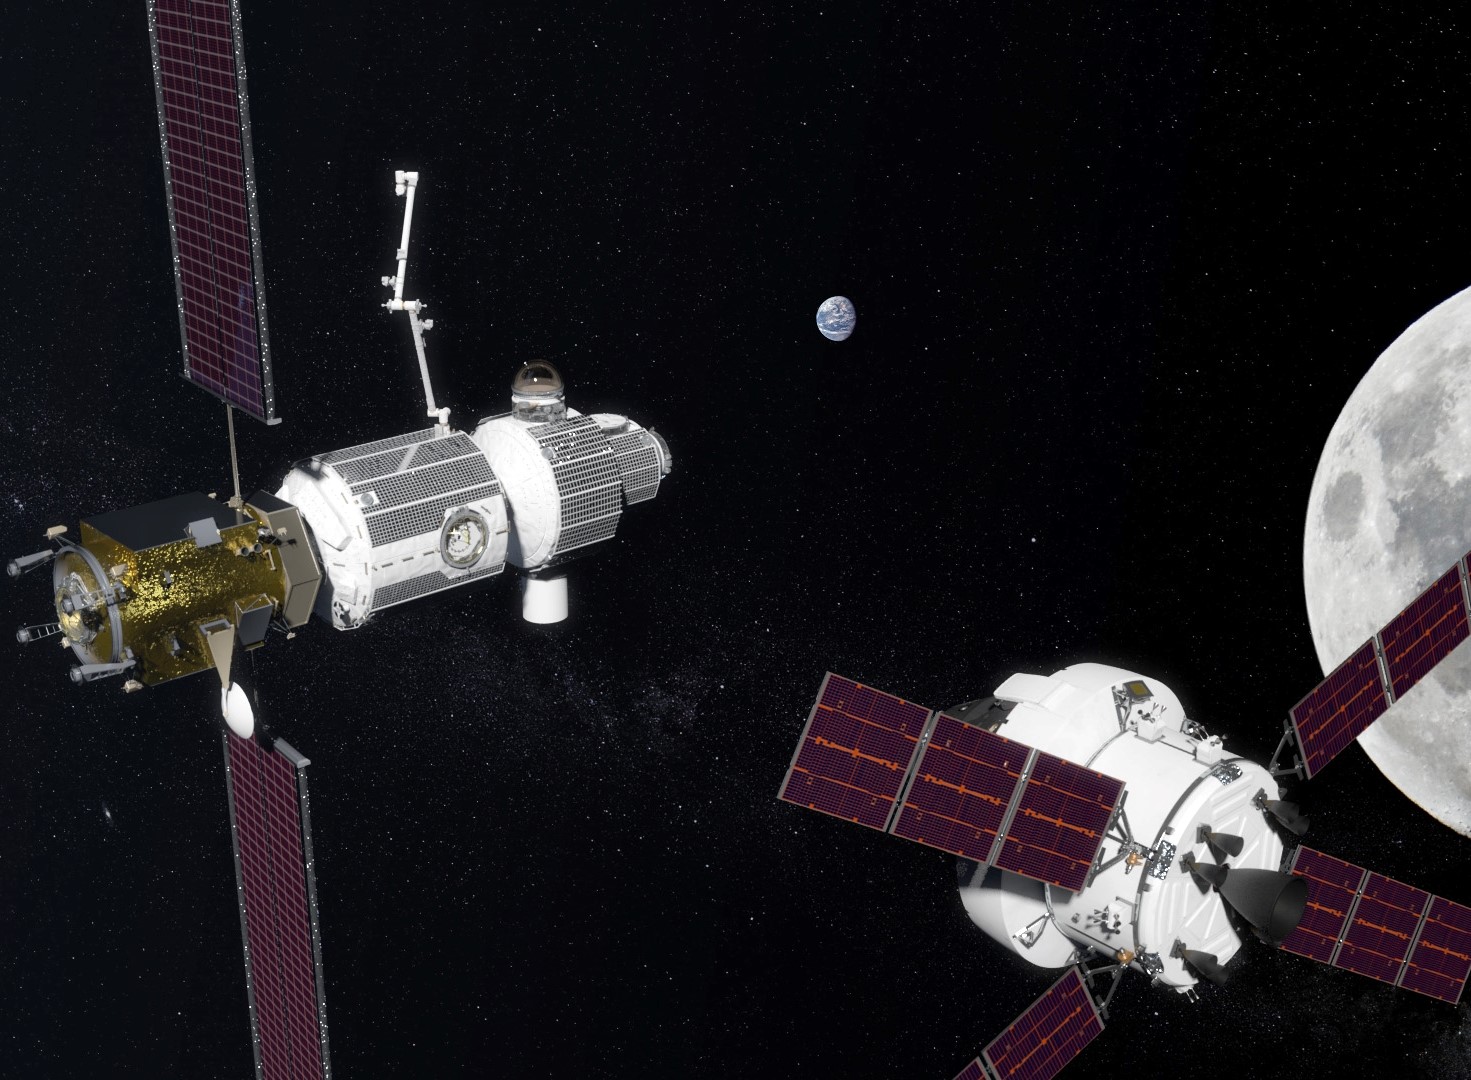 Artist's impression of the Deep Space Gateway, currently under development by Lockheed Martin. Credit: NASA